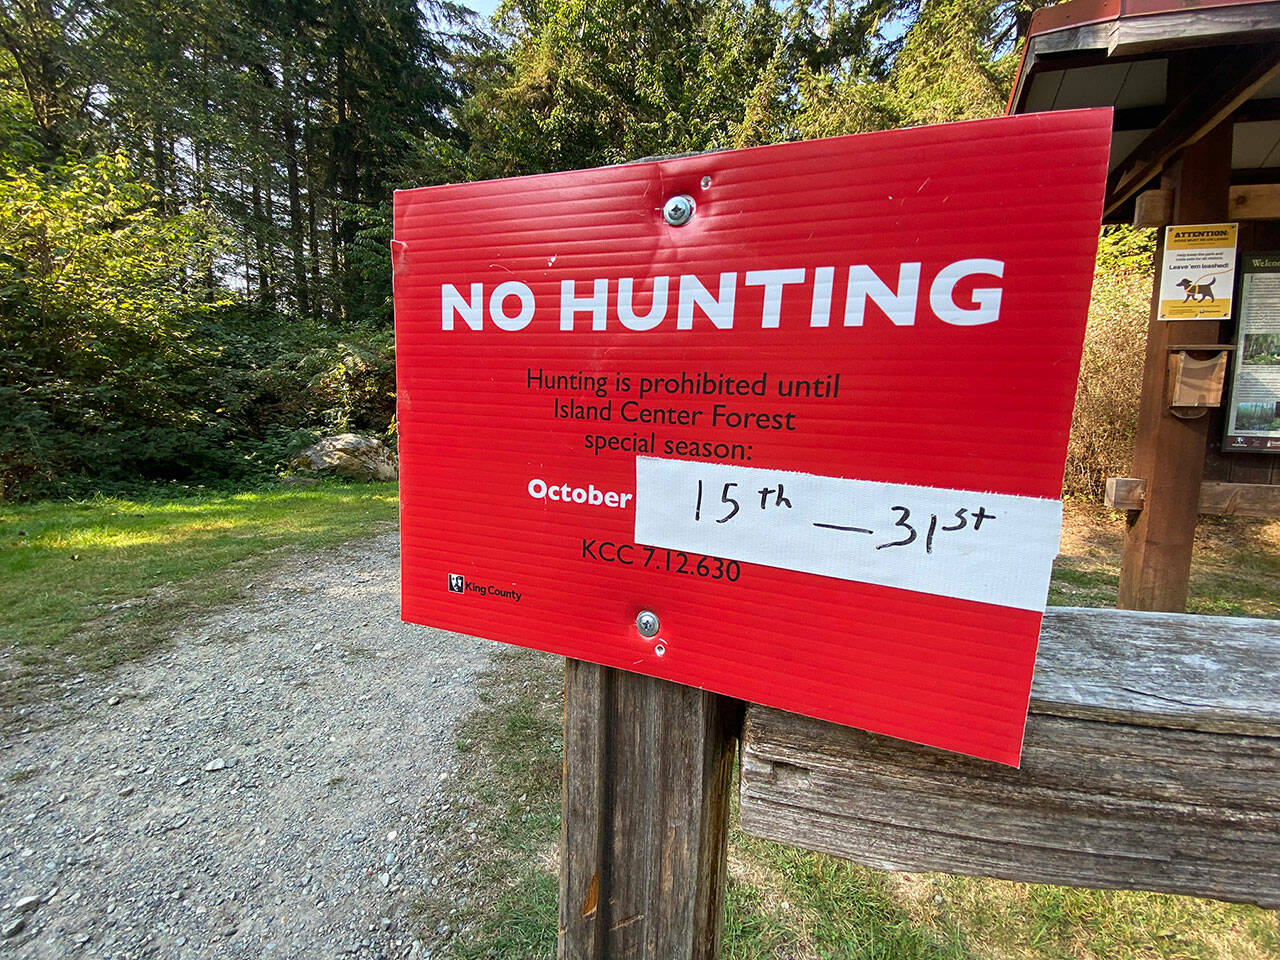 Tom Hughes Photo
Signs mark a brief hunting season that has closed Island Center Forest to other uses.